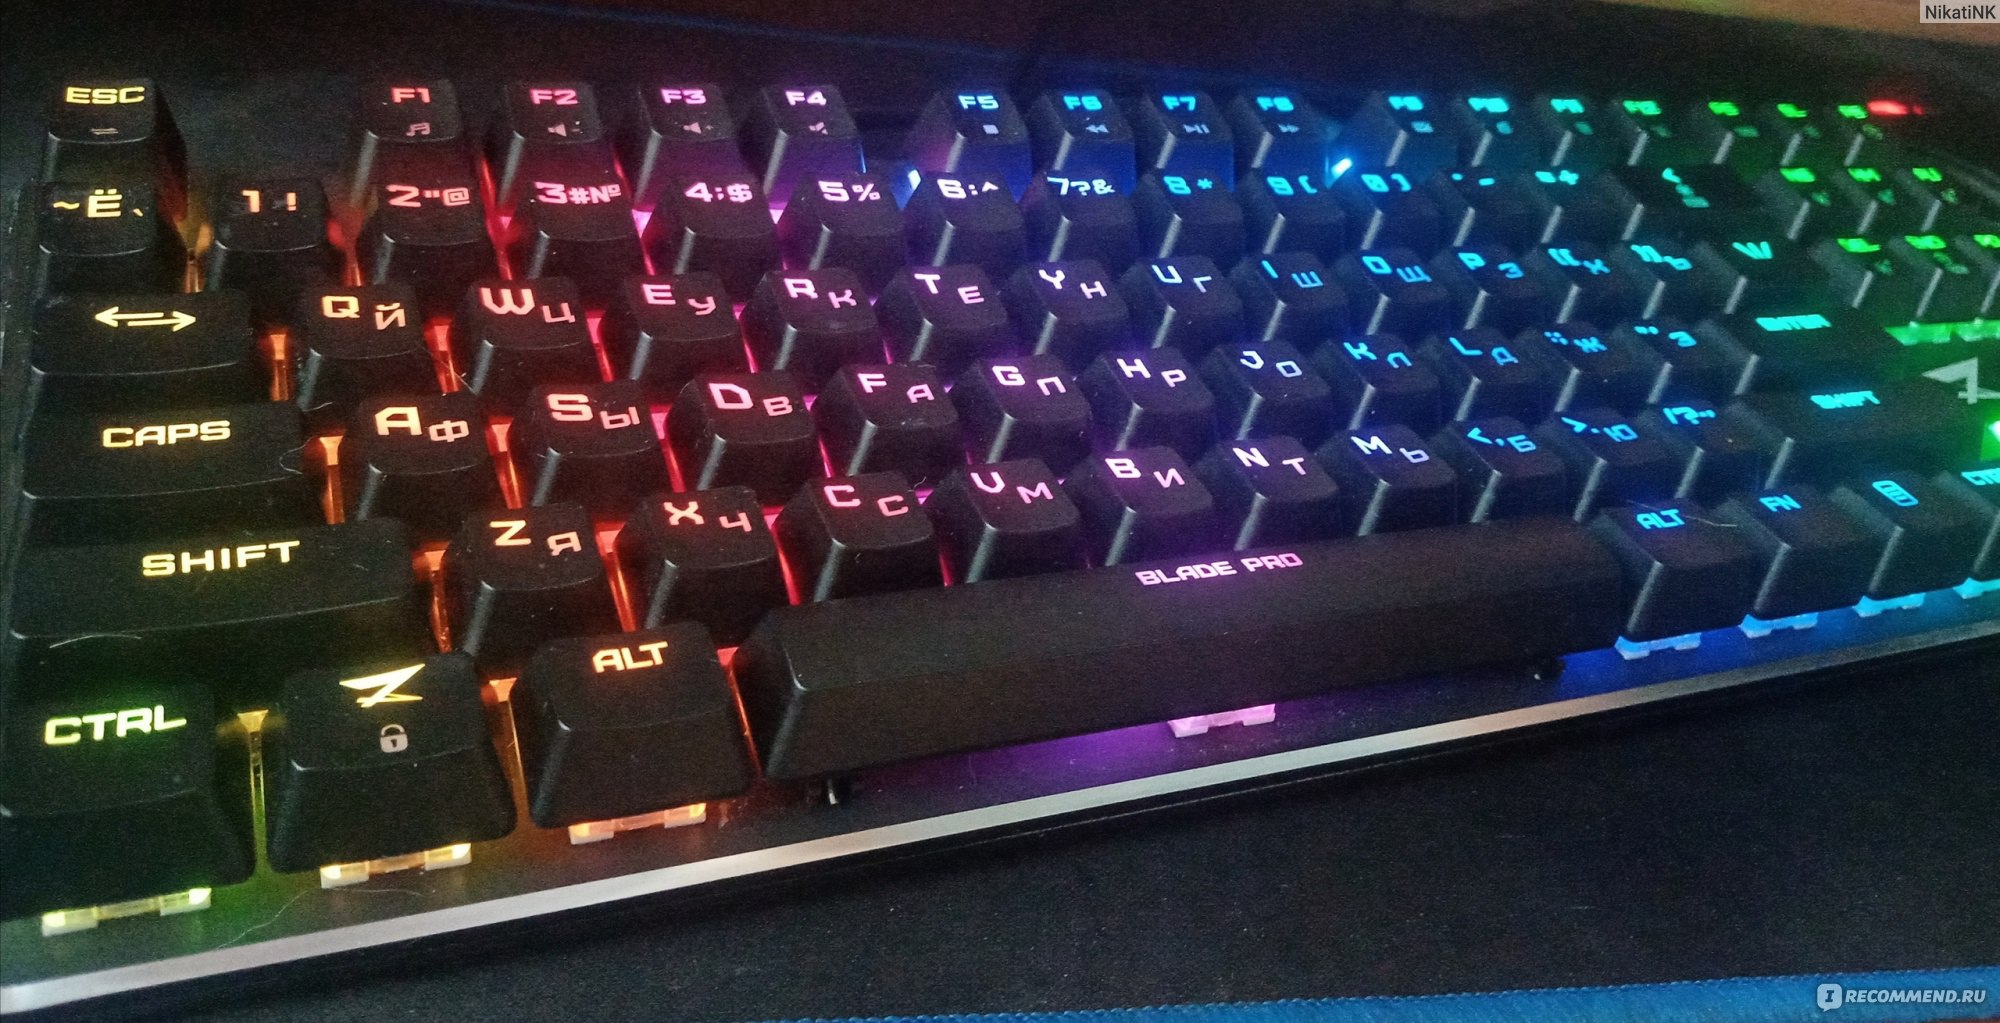 Zet gaming kailh red. Zet Blade Pro Kailh Red. Механическая клавиатура zet Gaming Blade Pro. Zet Gaming Blade Pro Kailh Red. Клавиатура Blade Pro RGB.